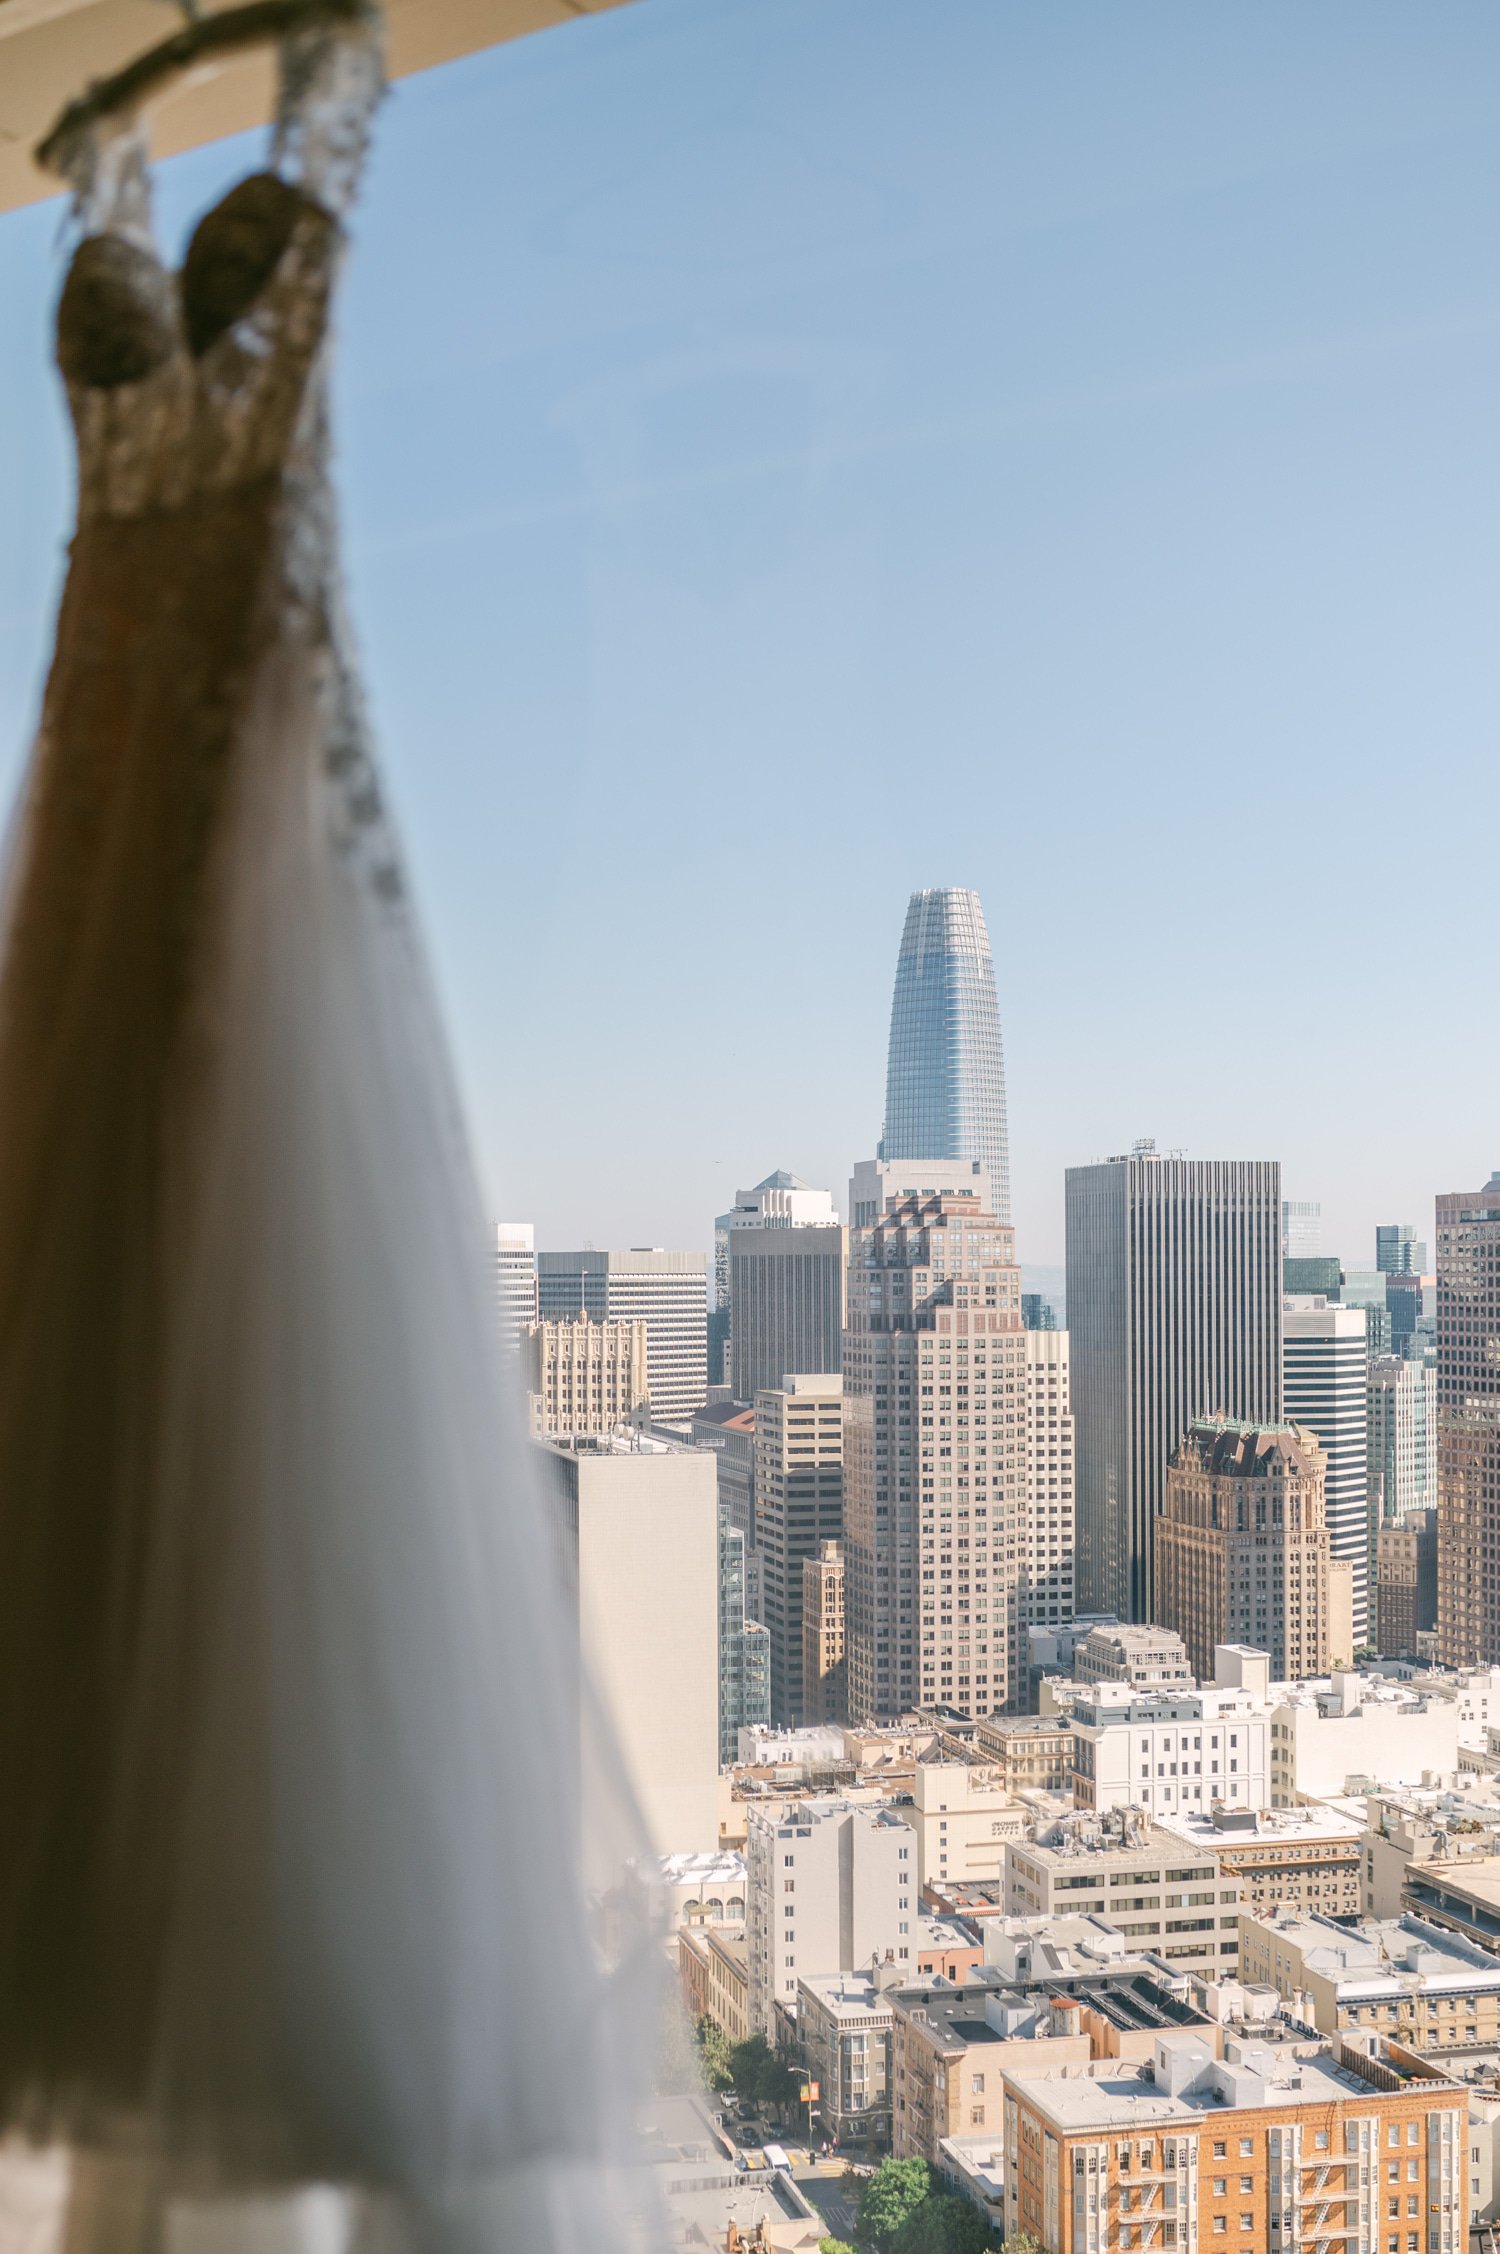 California academy of Sciences in San Francisco Wedding, photo of the wedding dress hanging by the window with the view of the city